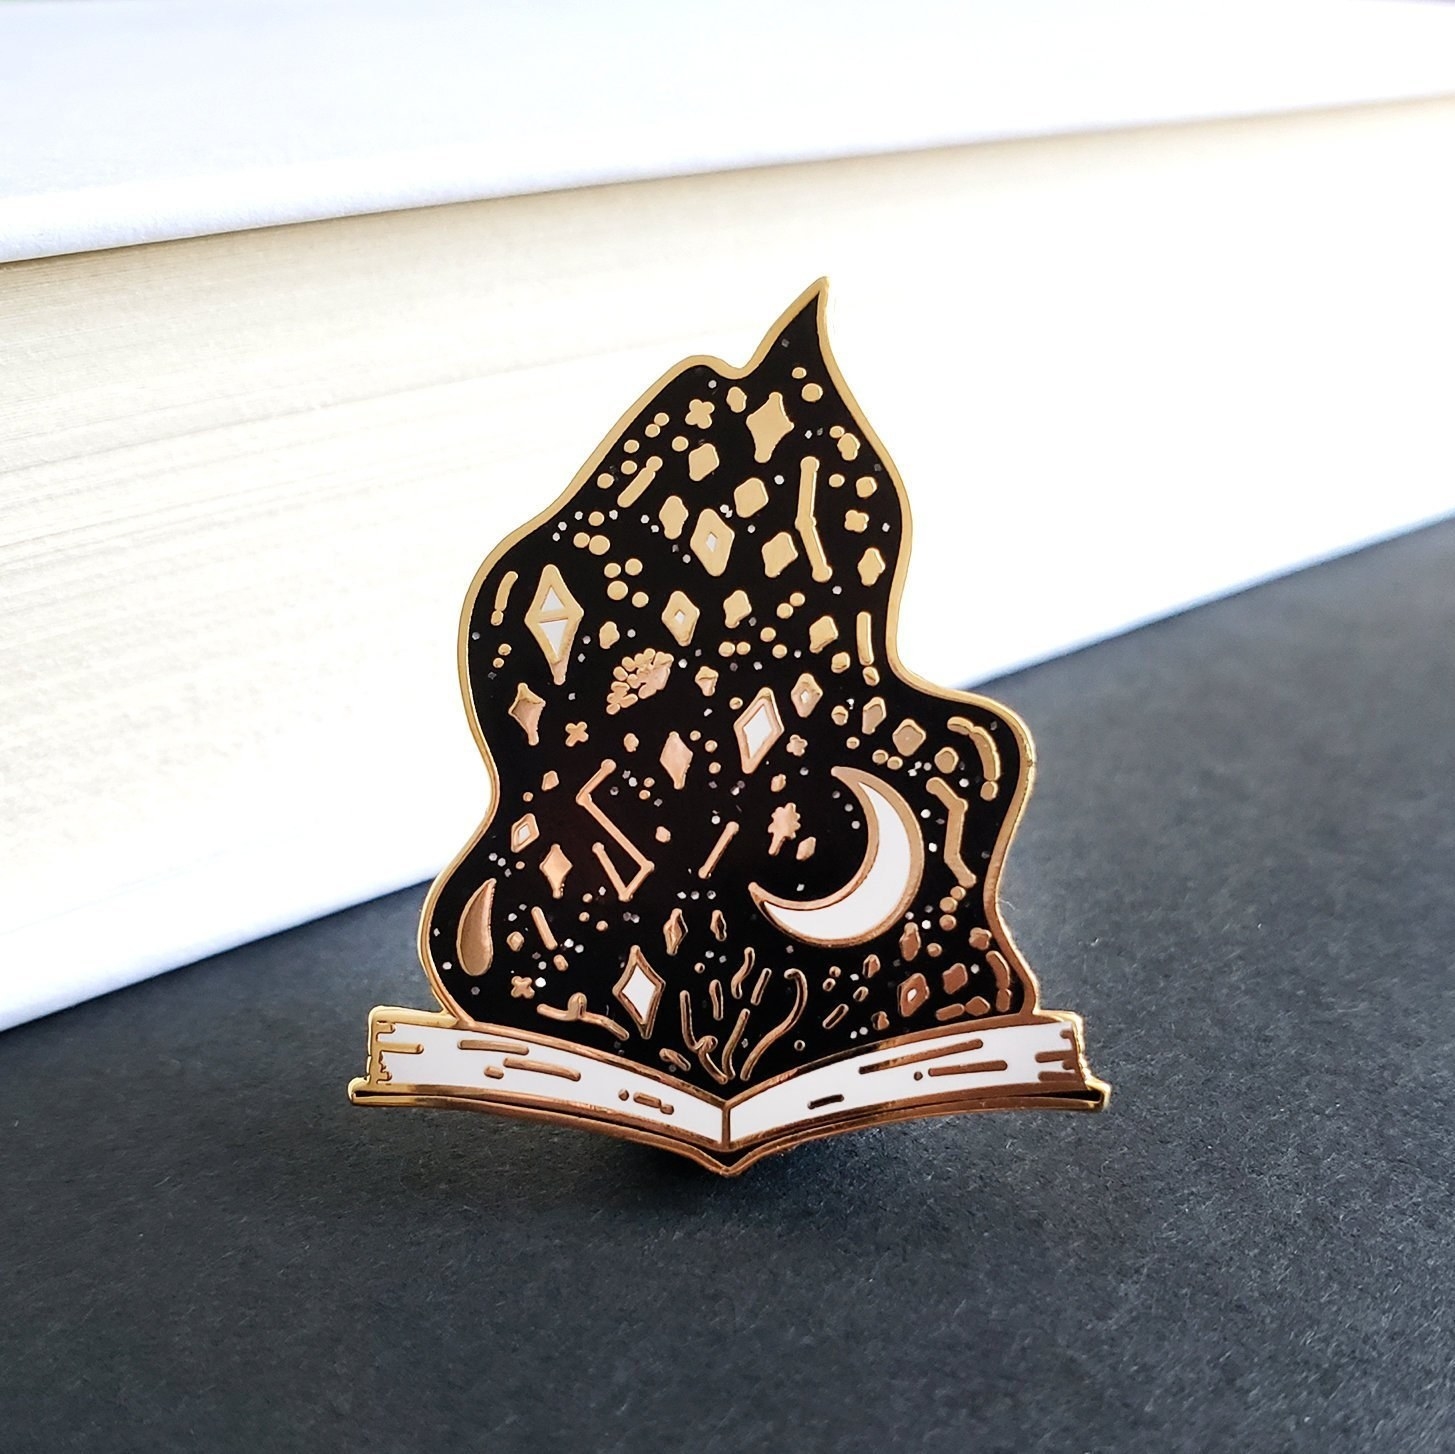 a small book opened with a black flame filled with astrological symbols inside of it